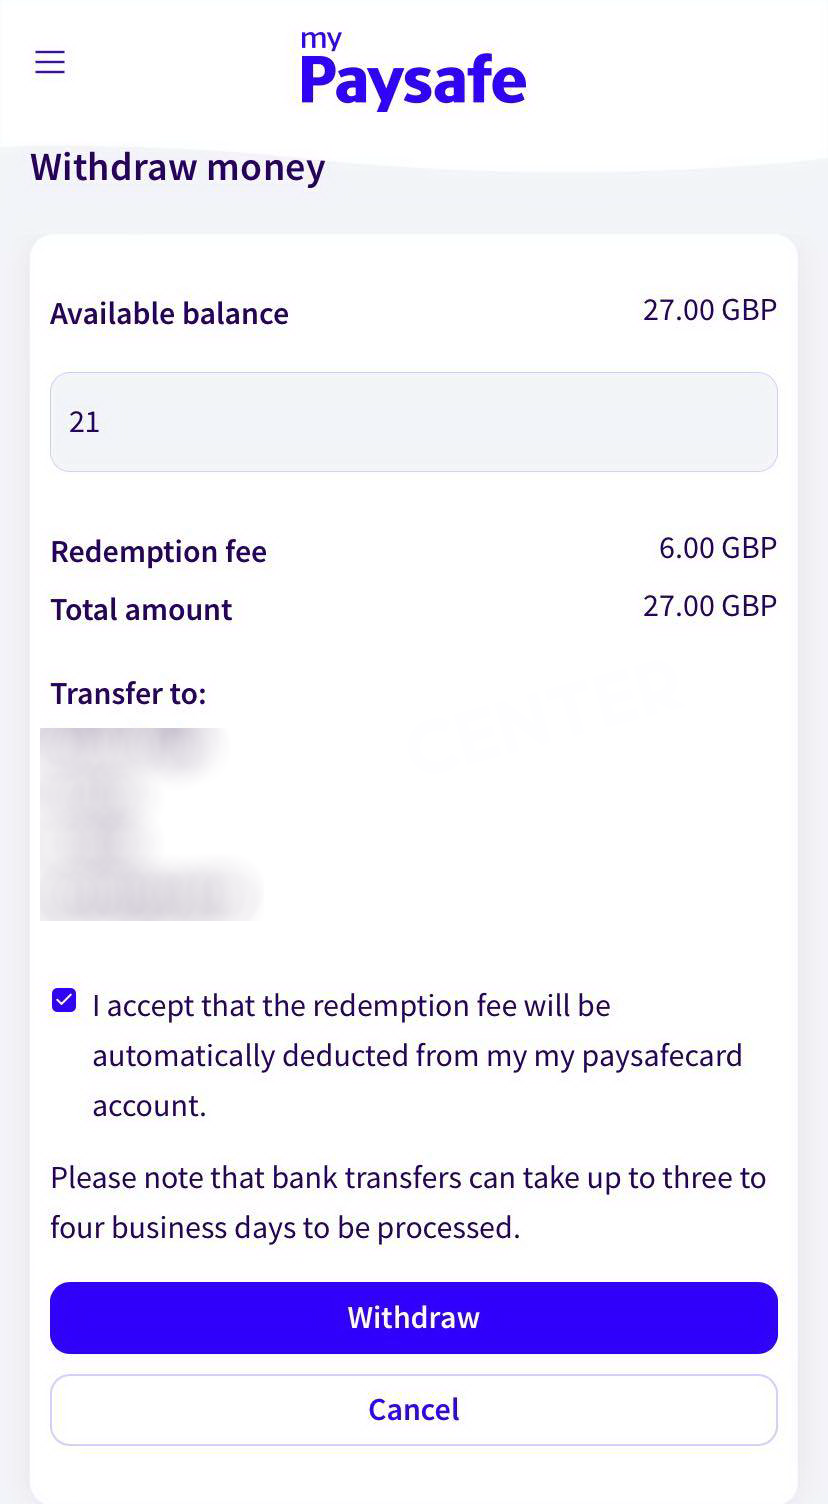 Withdrawal request with a £6 fee